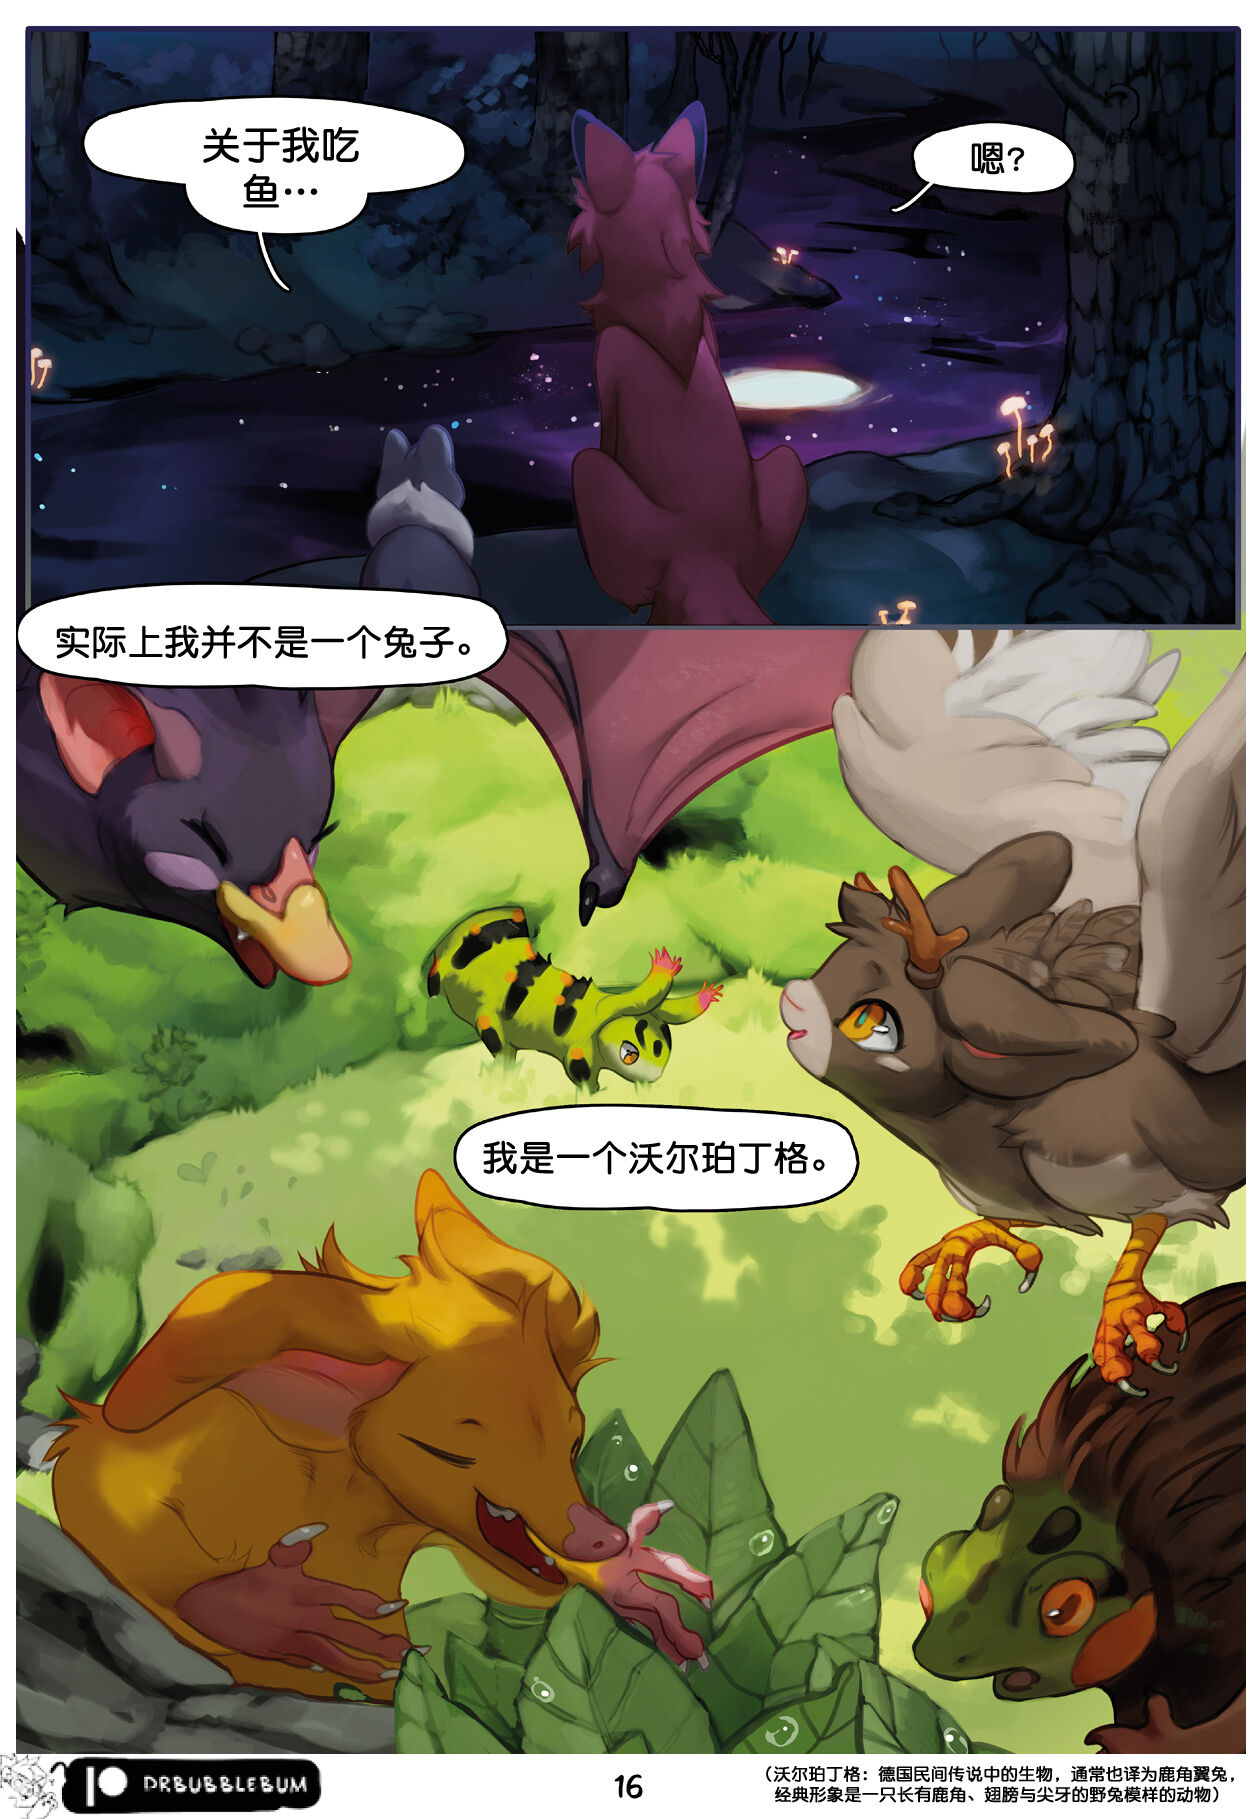 [Dr.BubbleBum] Force of Nature 自然之力 1-2 [Chinese] [逃亡者×真不可视汉化组] 